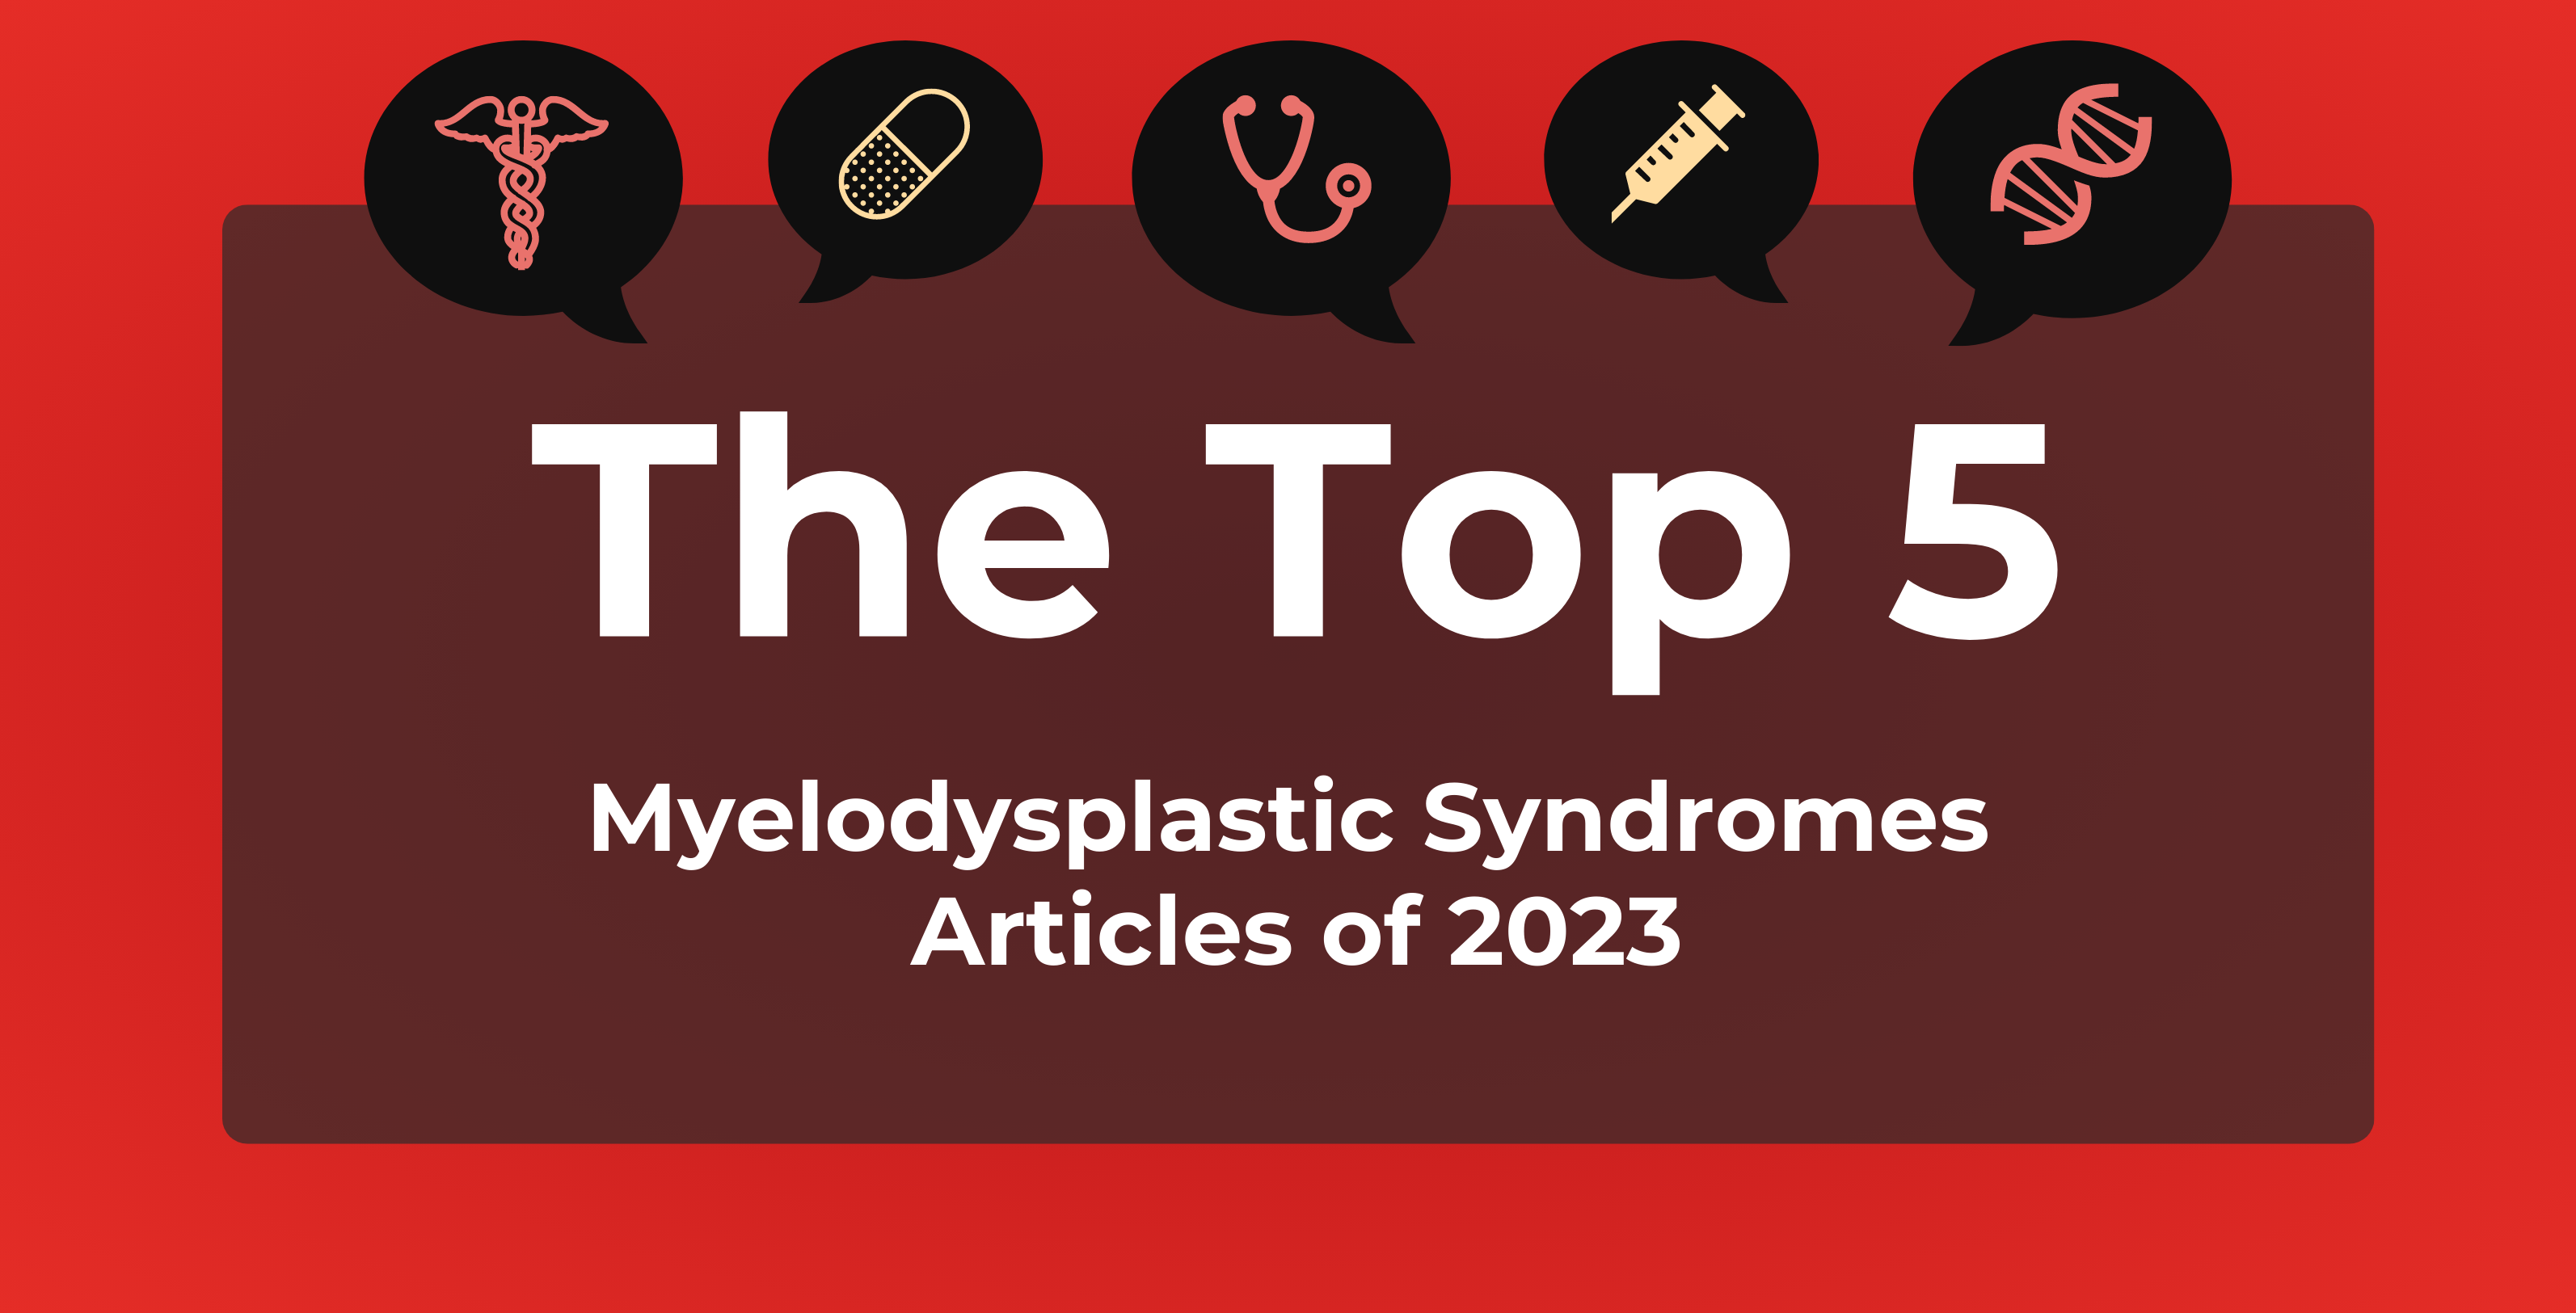 Top 5 myelodysplastic syndromes articles of 2023